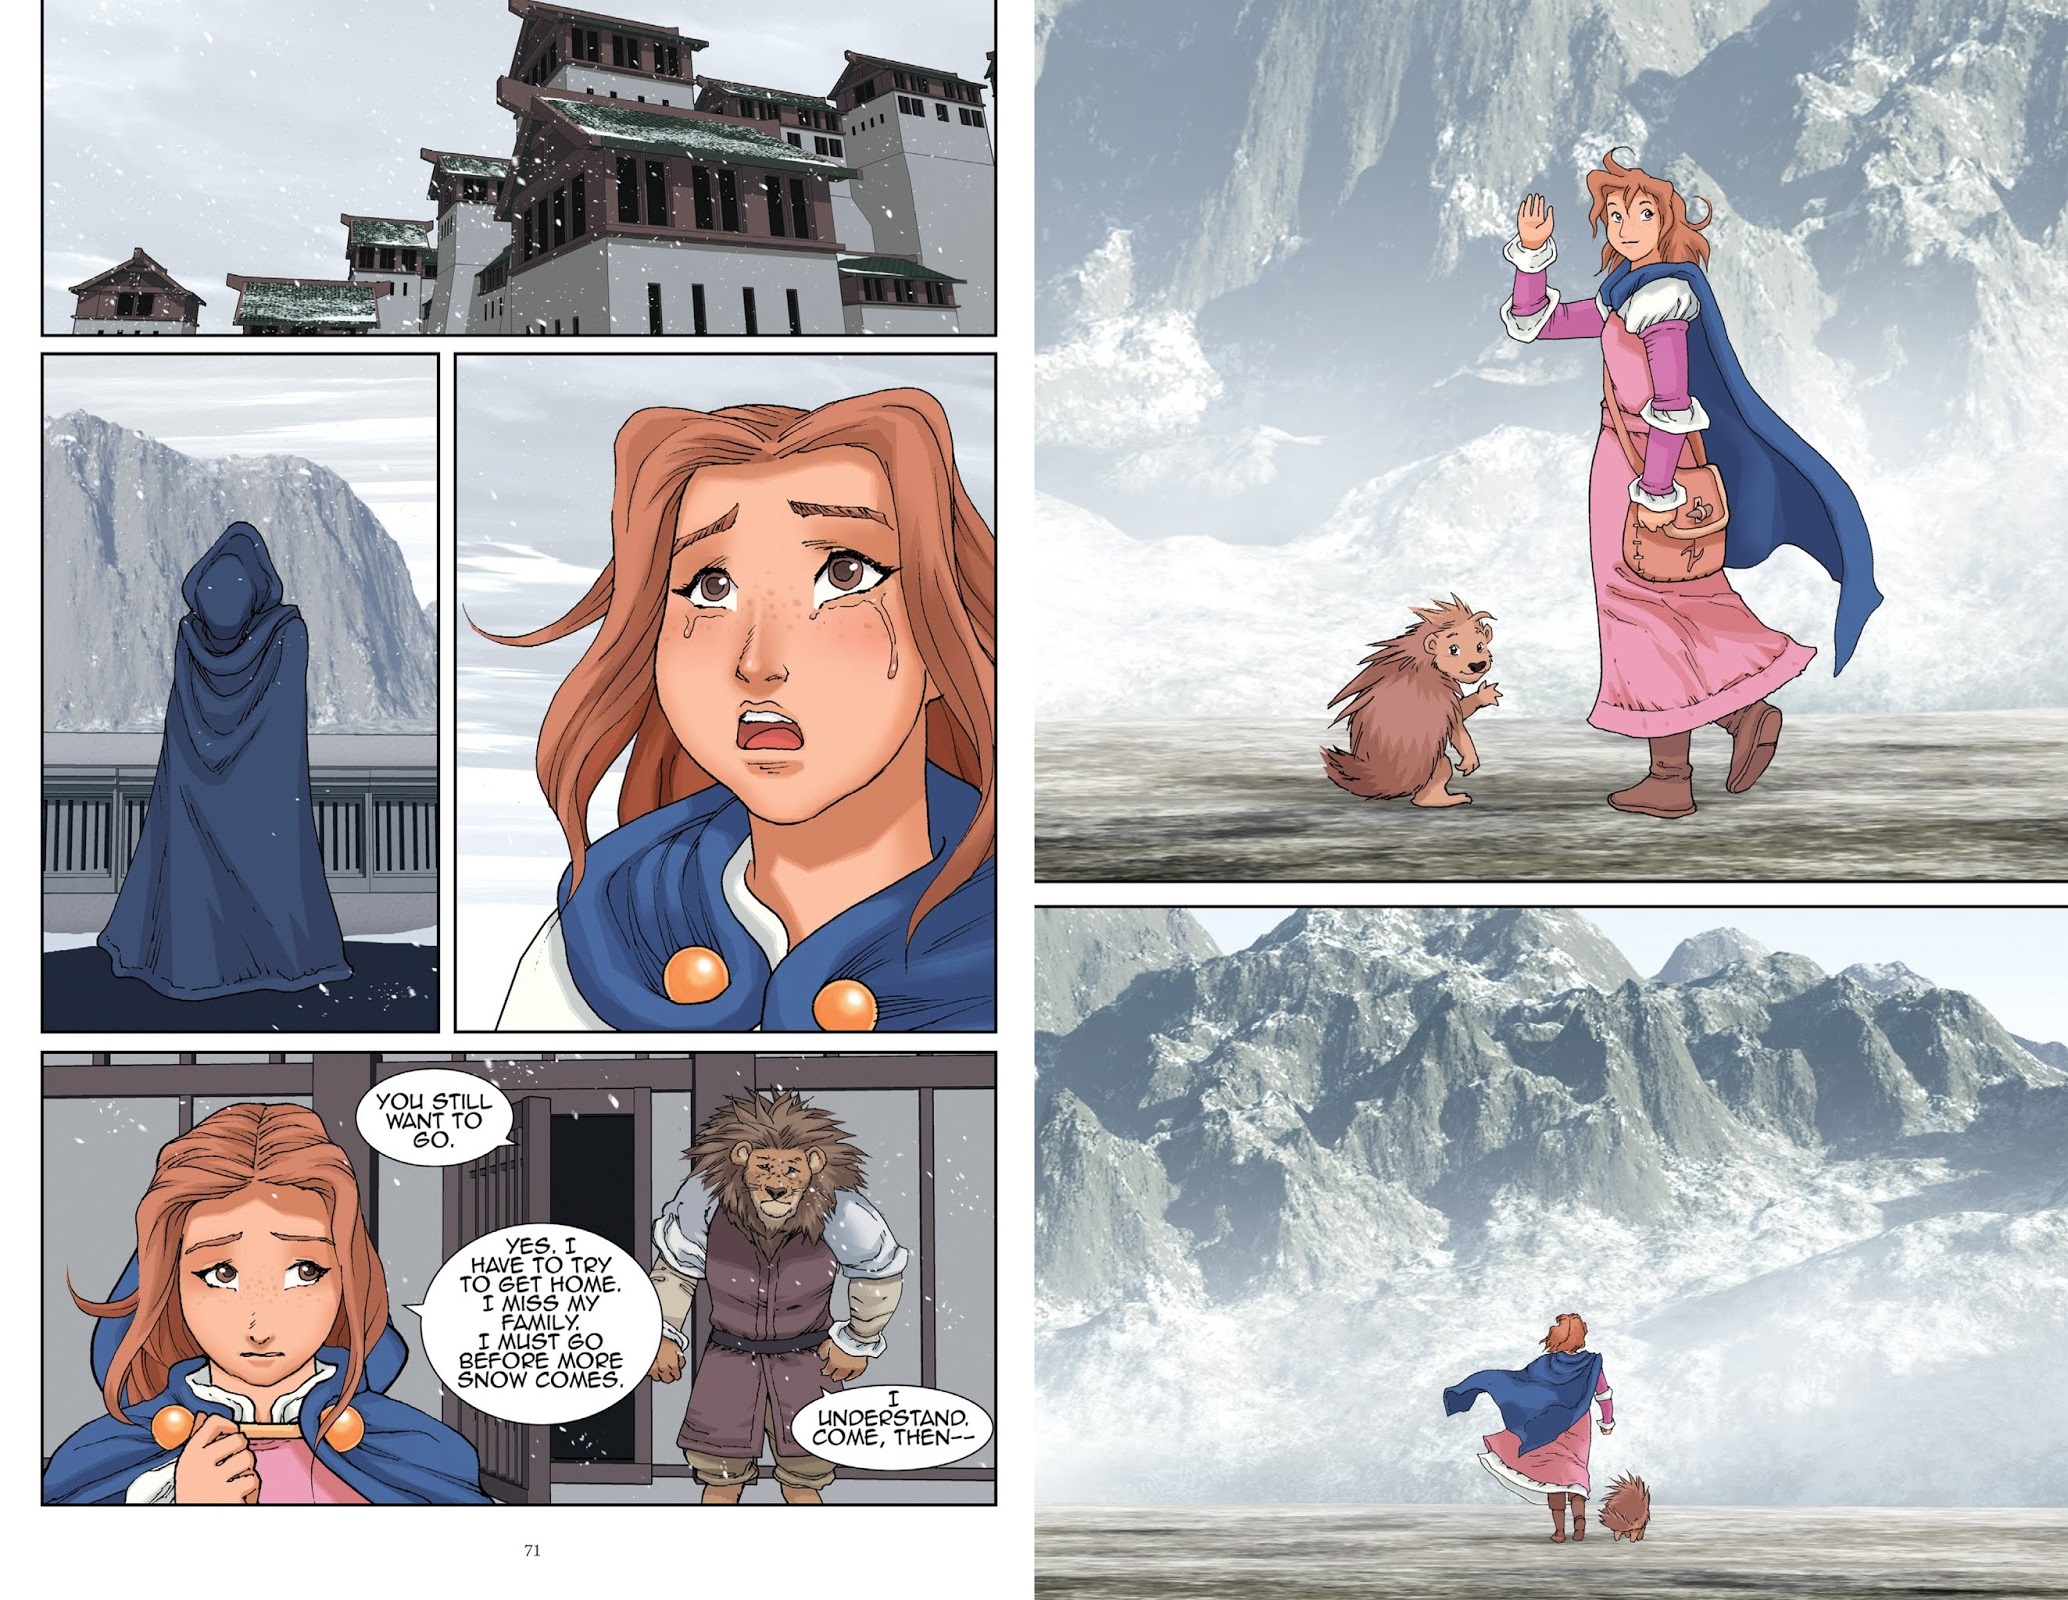 The Courageous Princess The Unremembered Lands review